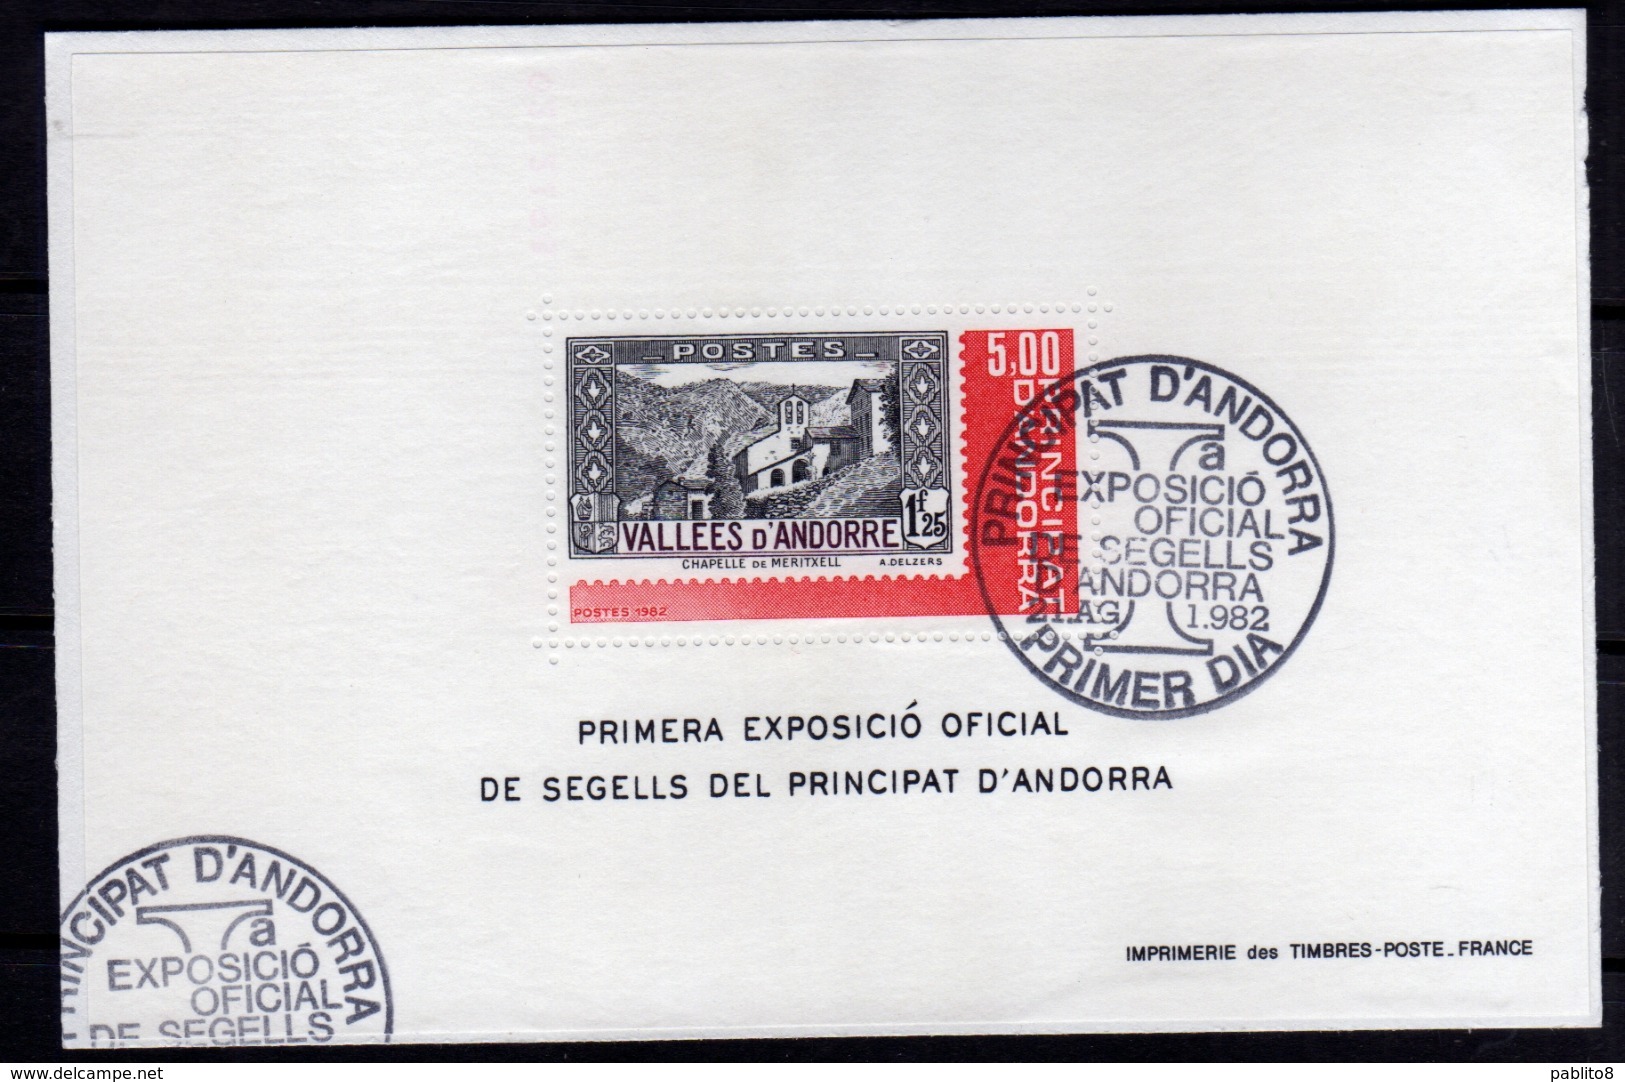 ANDORRA ANDORRE FRENCH FRANCESE 1992 STAMP ON STAMP PHILATELY BLOCK SHEET BLOCCO FOGLIETTO BLOC FEUILLET FDC - Hojas Bloque